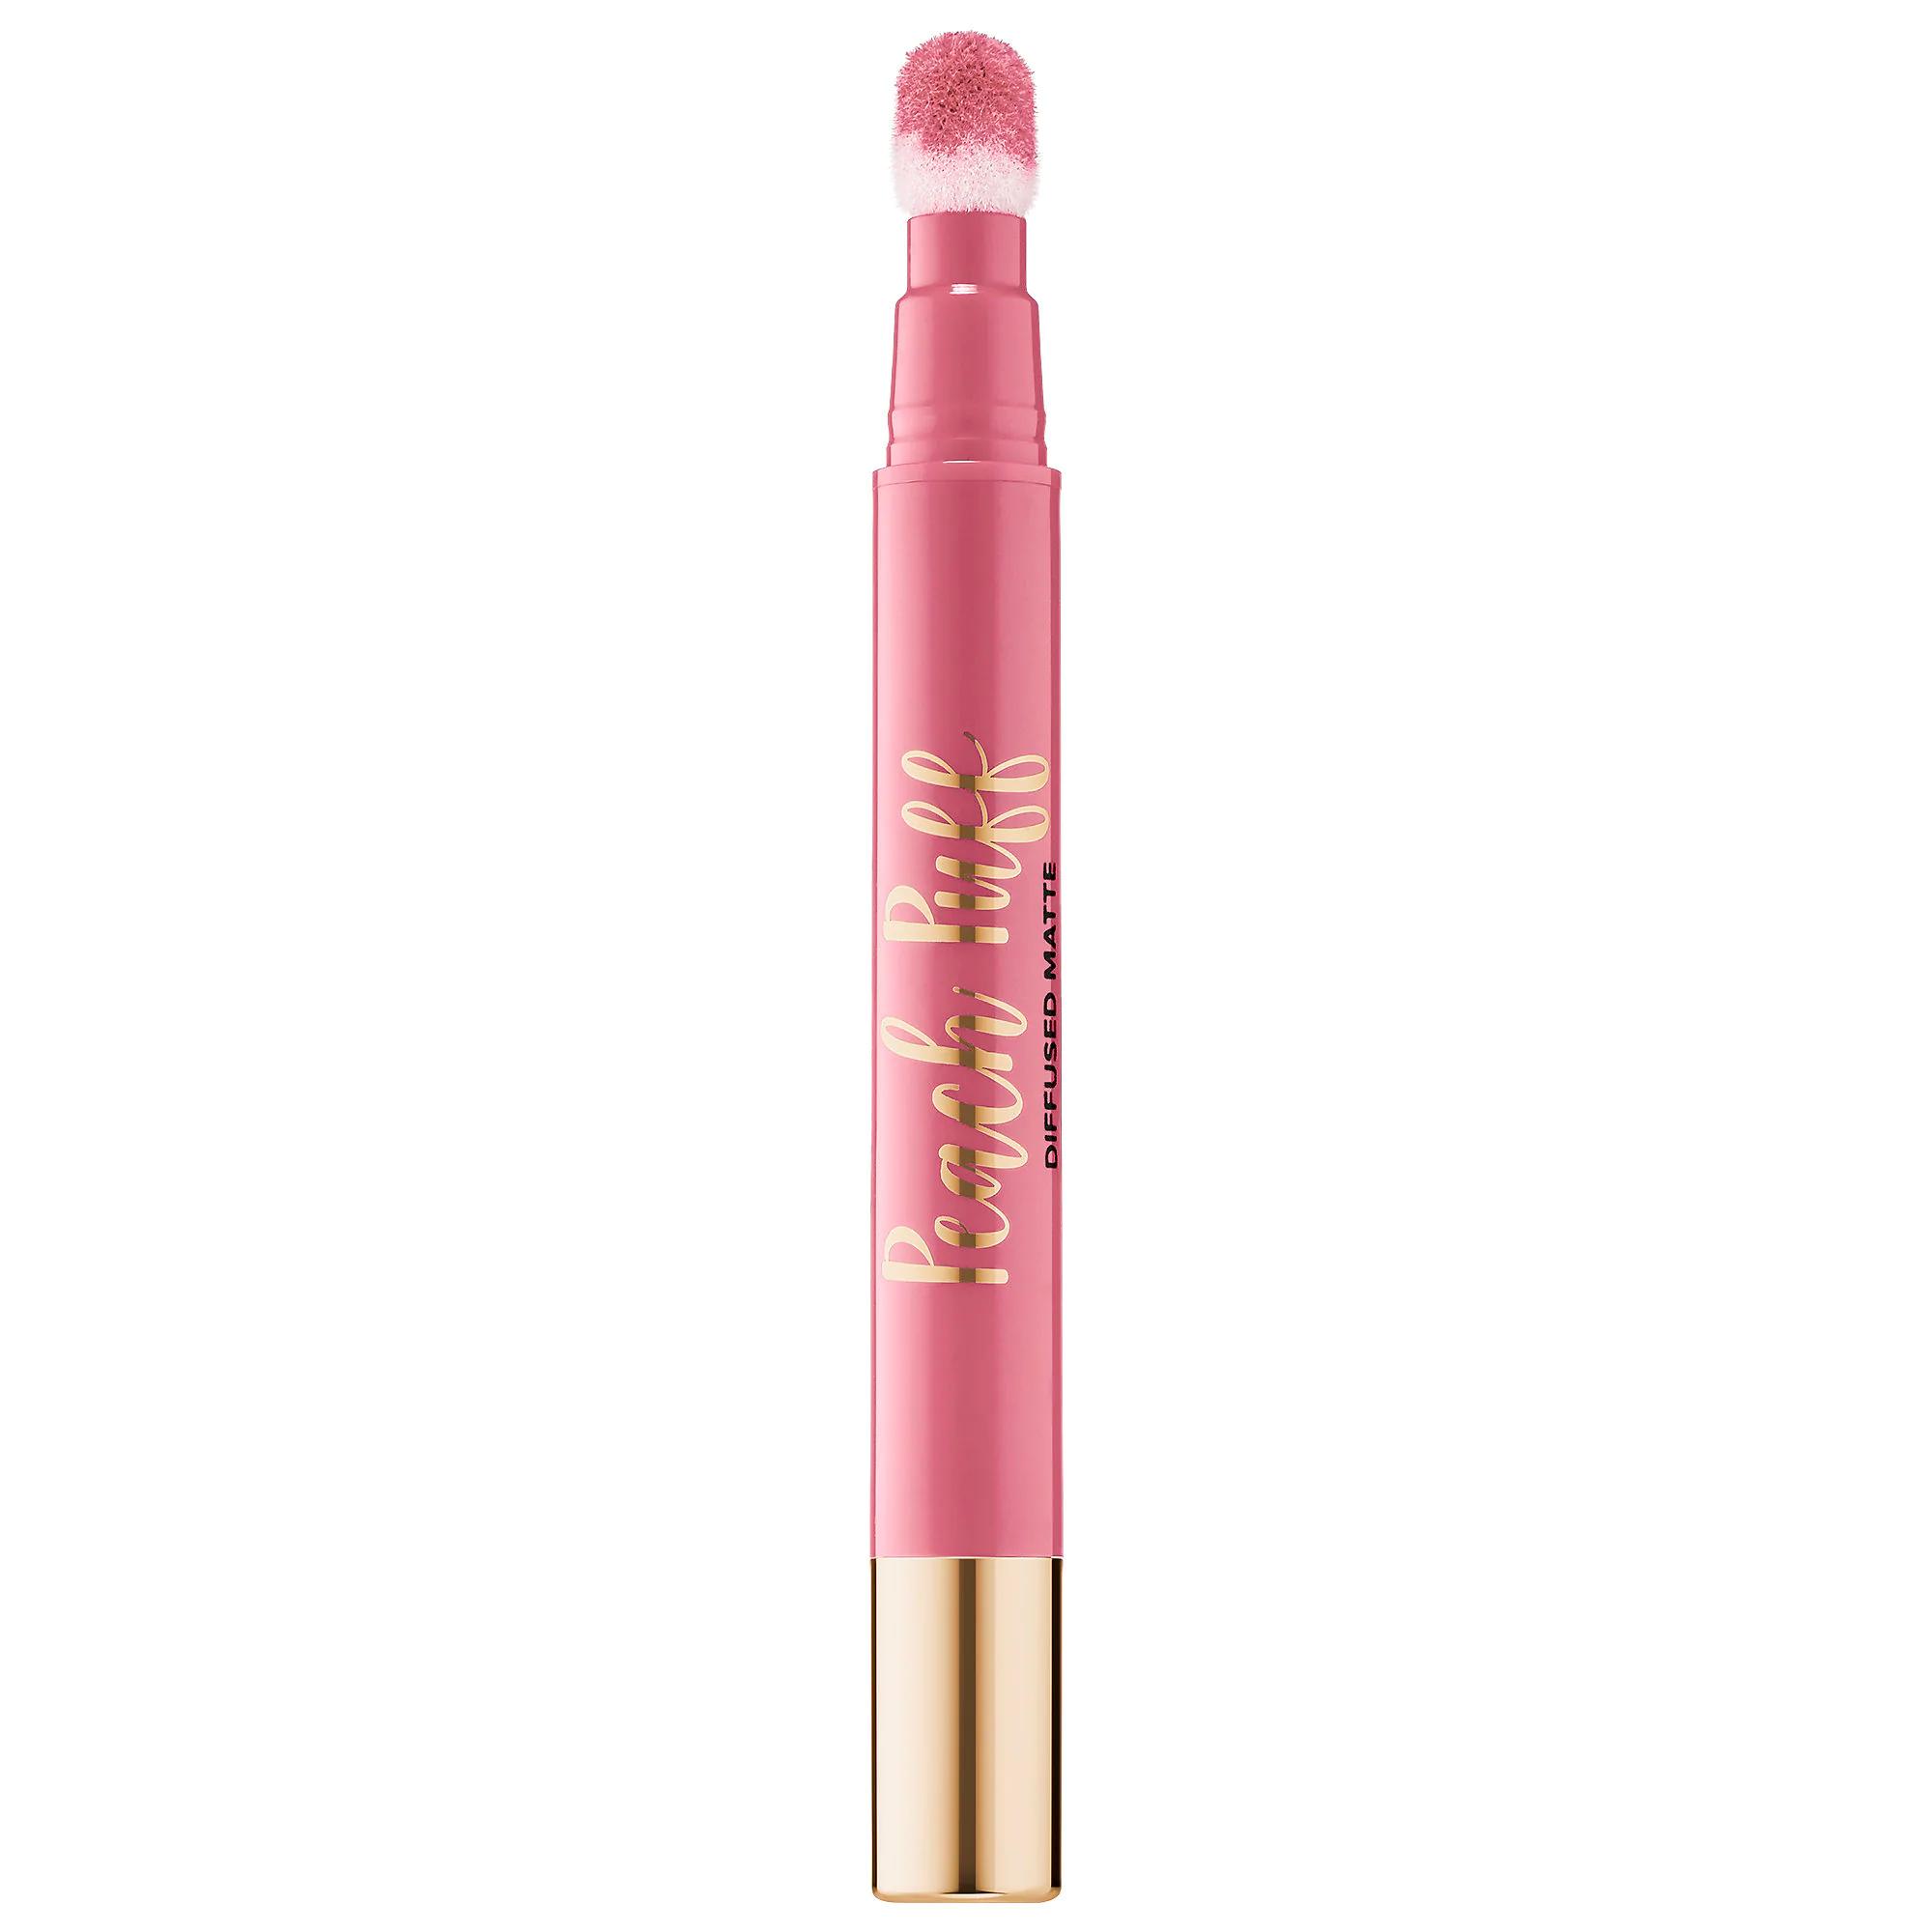 Too Faced Peach Puff Matte Lip Color Stoked